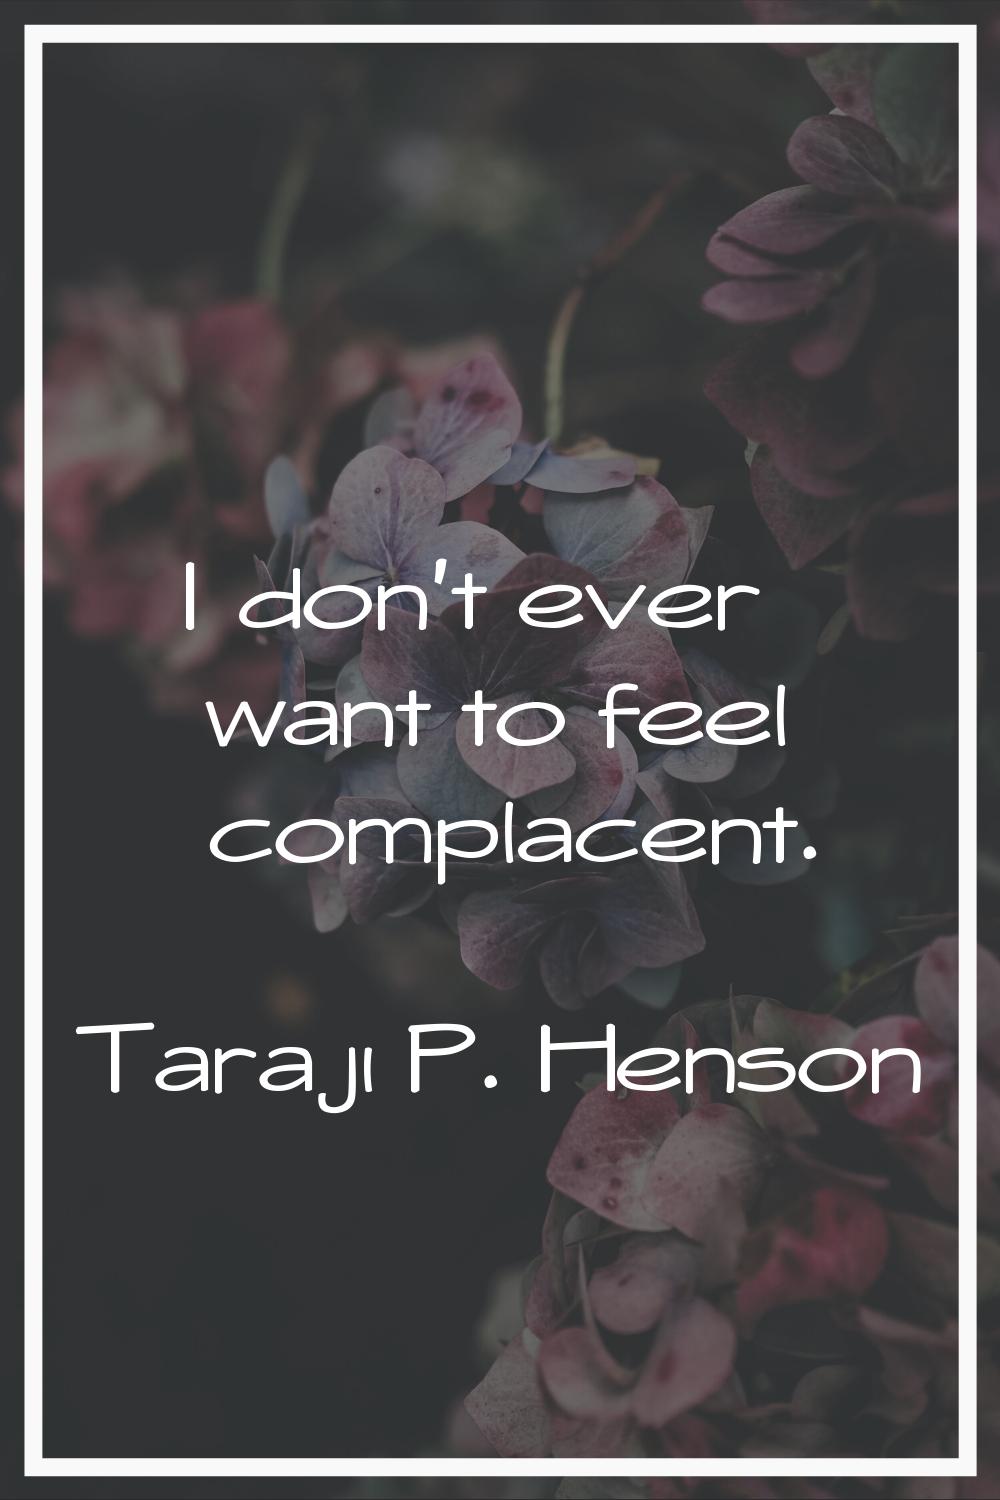 I don't ever want to feel complacent.